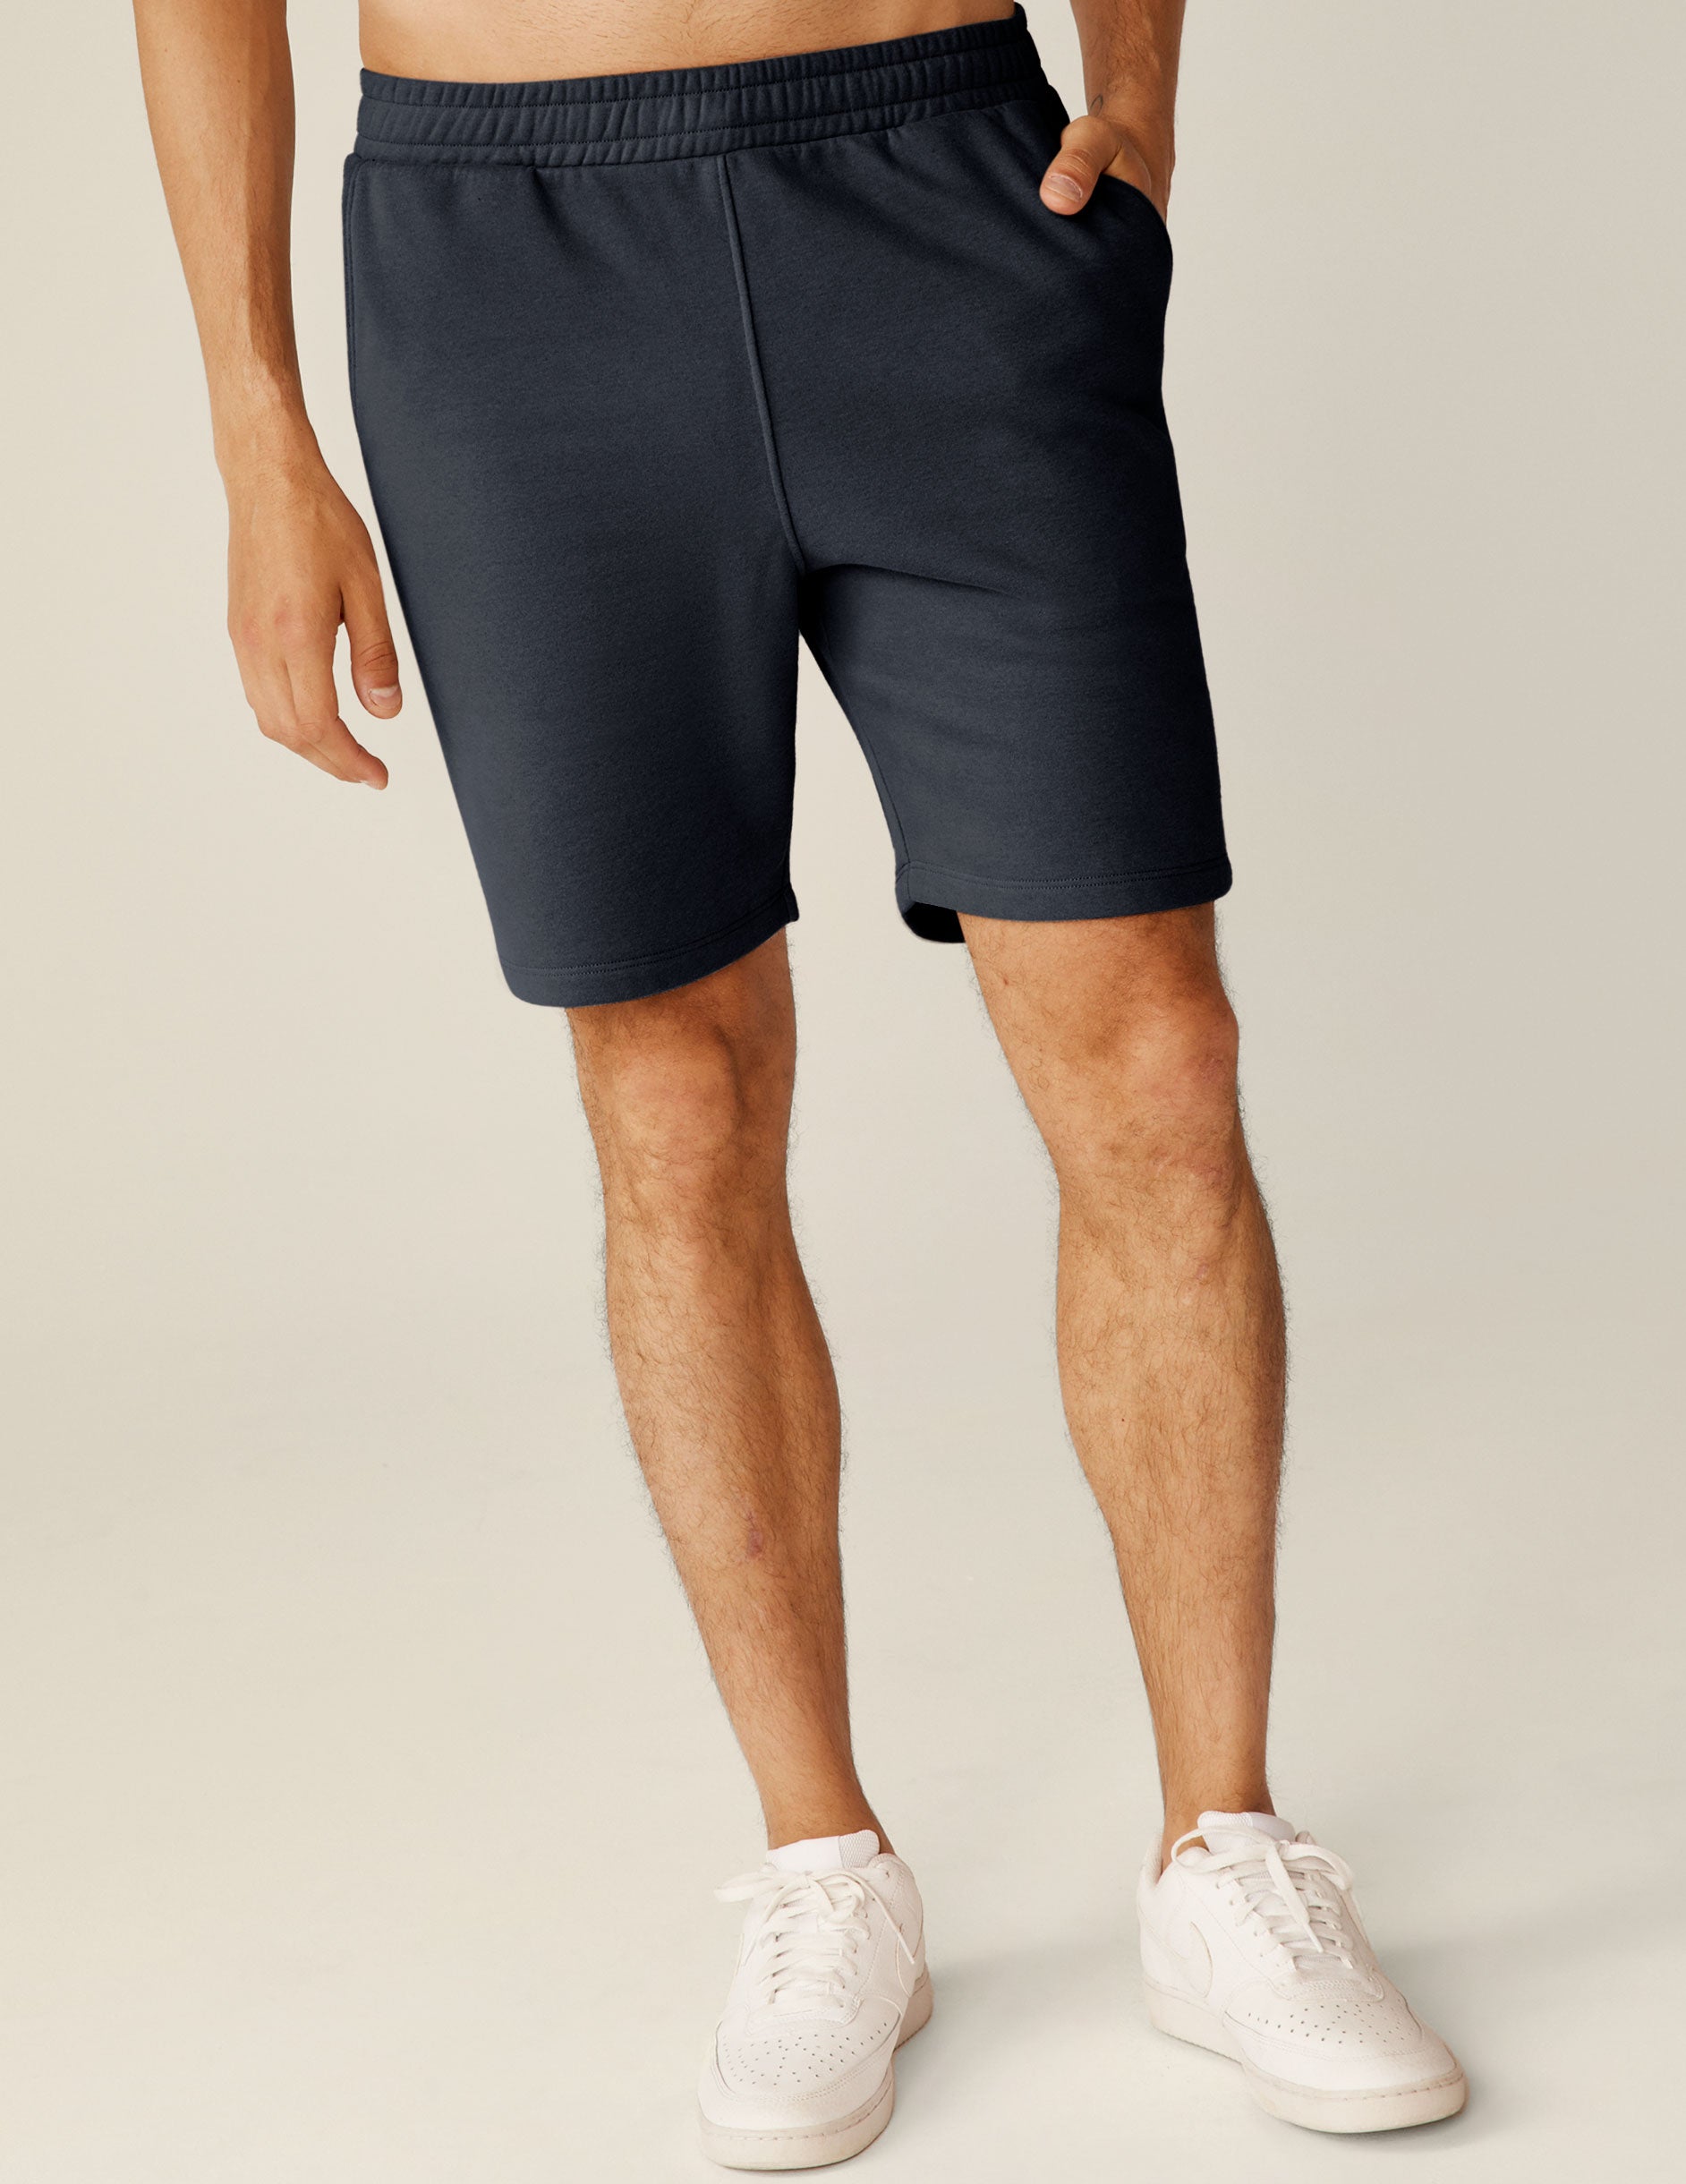 blue mens sweat shorts with pockets. 